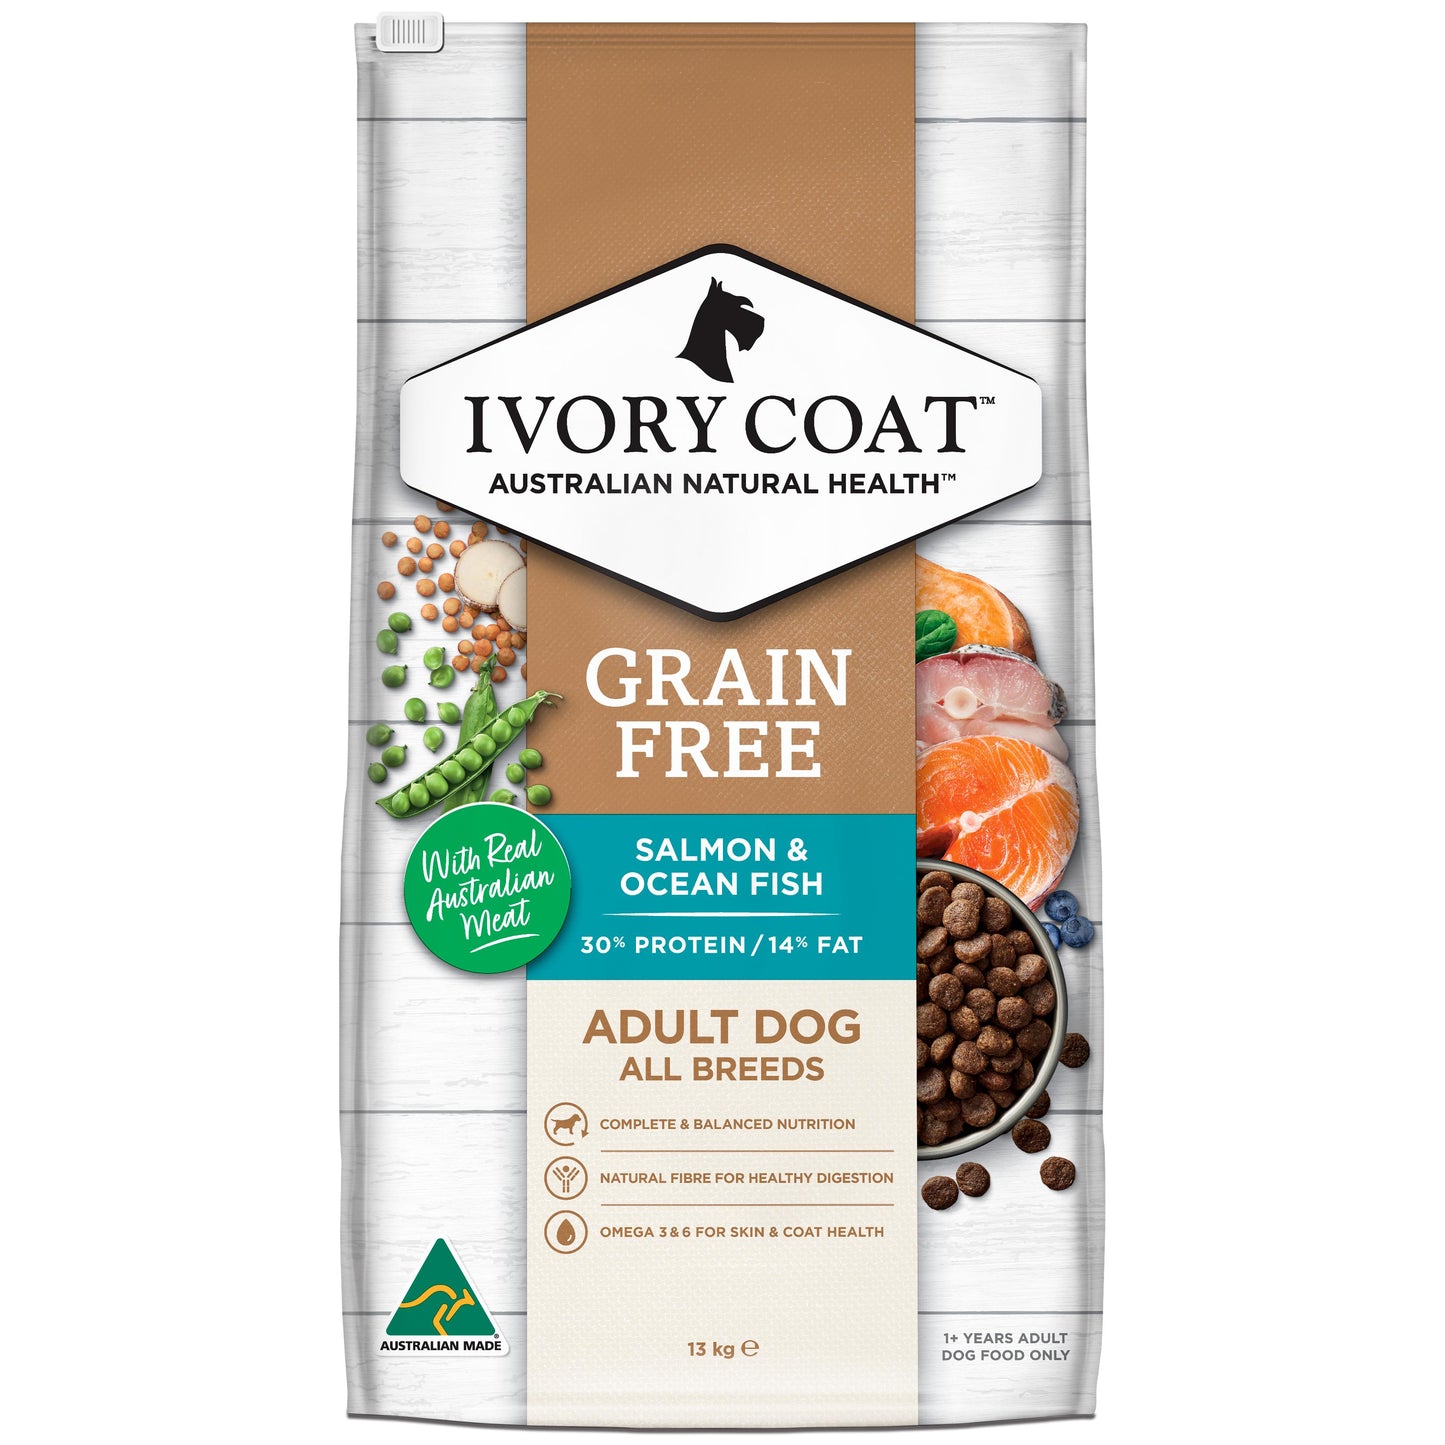 Ivory Coat Grain Free Salmon & Ocean Fish Dry Food for Adult Dogs